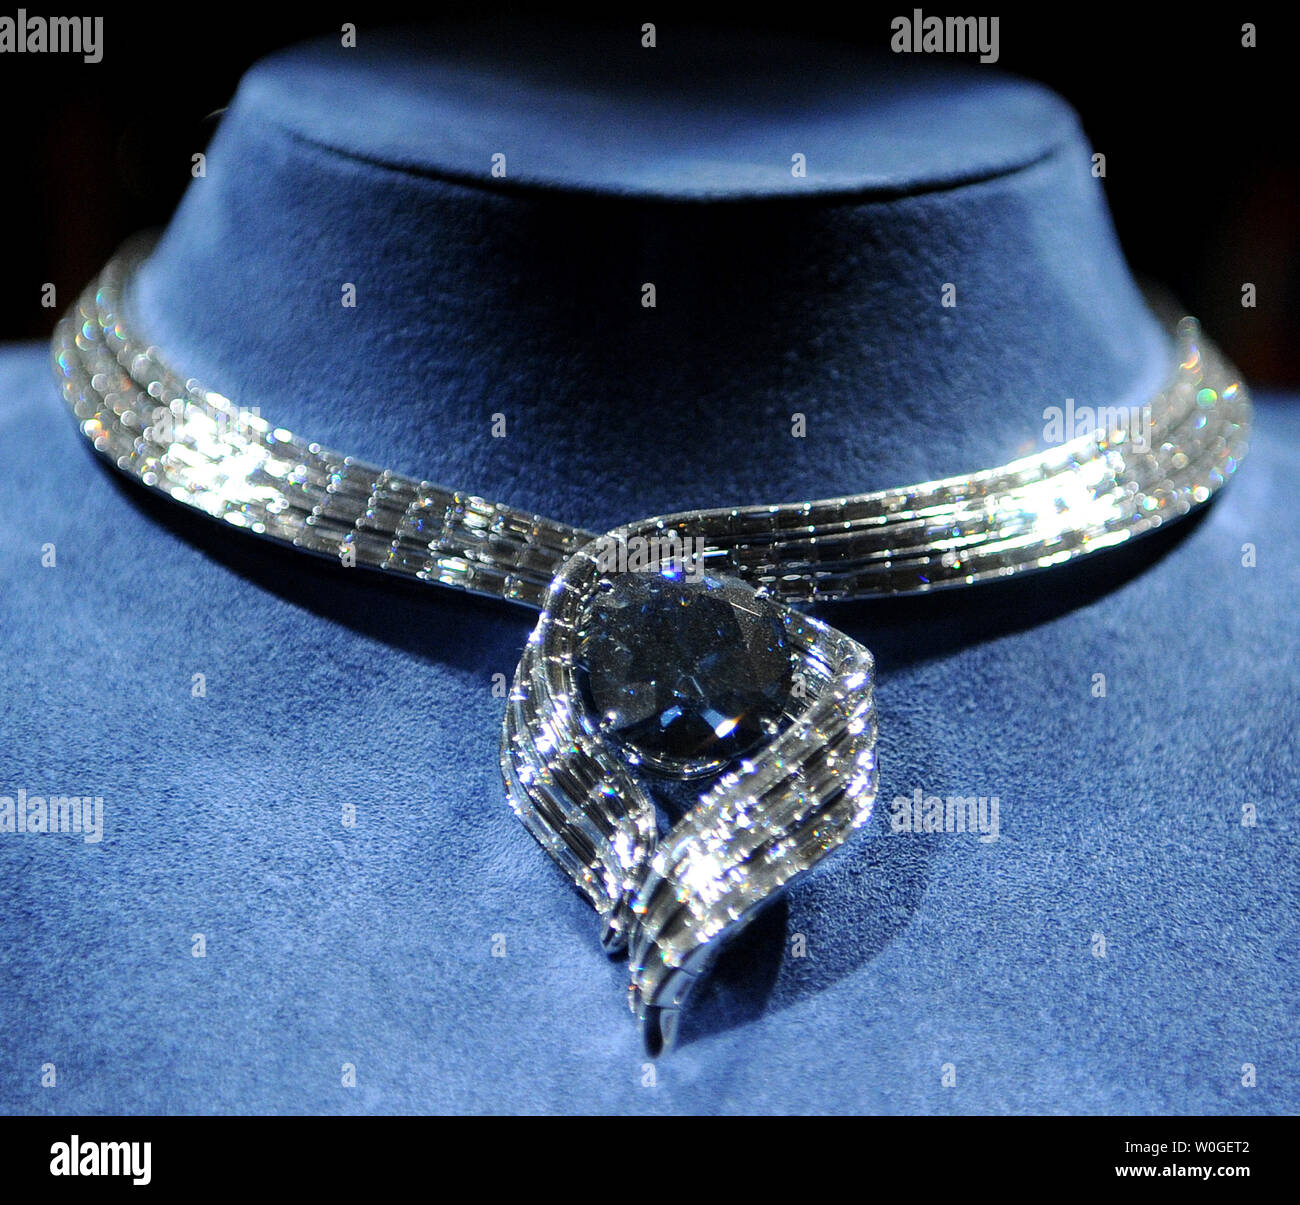 The Hope Diamond is on display at the Smithsonian's Museum of Natural History in Washington, DC, on August 5, 2011.   UPI/Roger L. Wollenberg Stock Photo